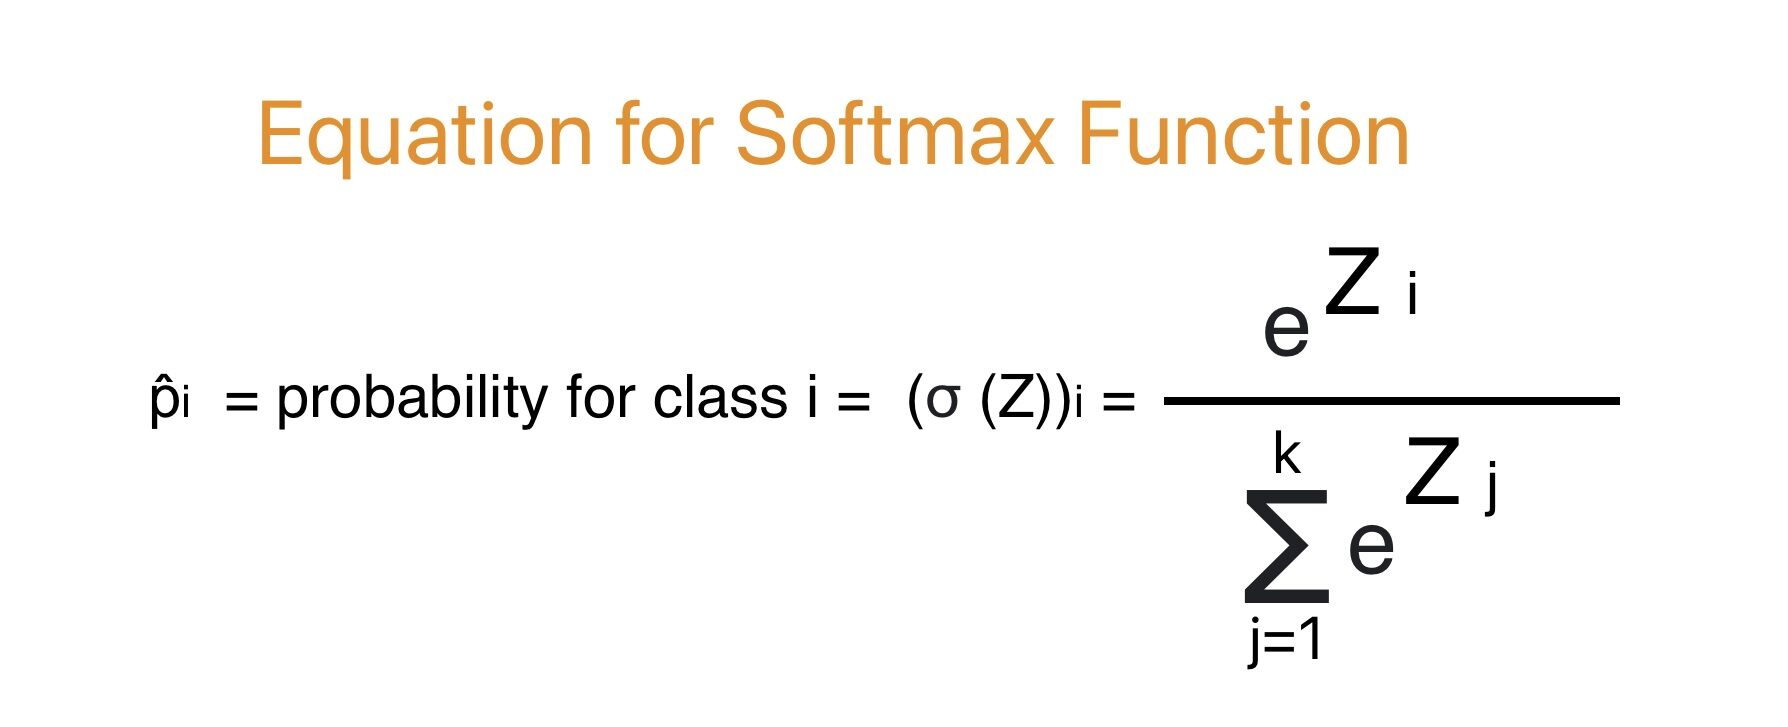 This image shows the equation for Softmax Function in softmax regression in machine learning.